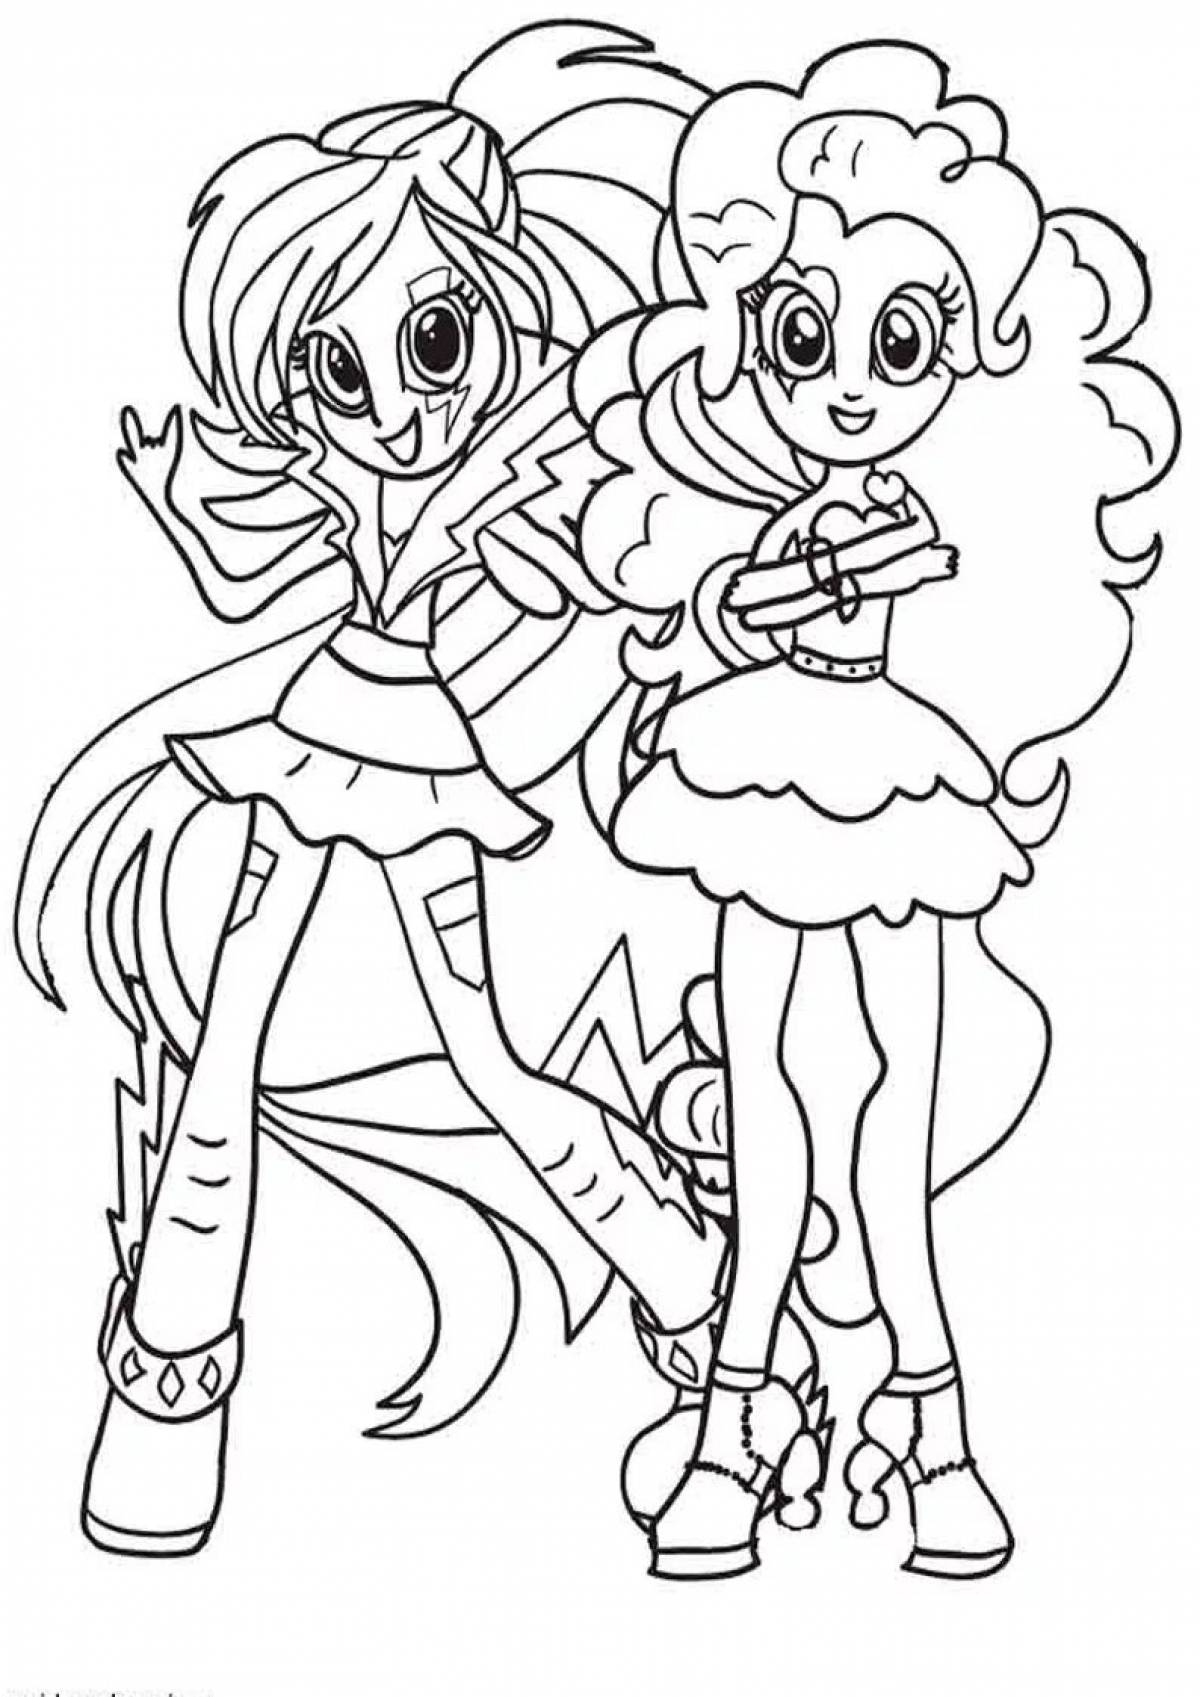 Coloring serene my little pony equestria girls